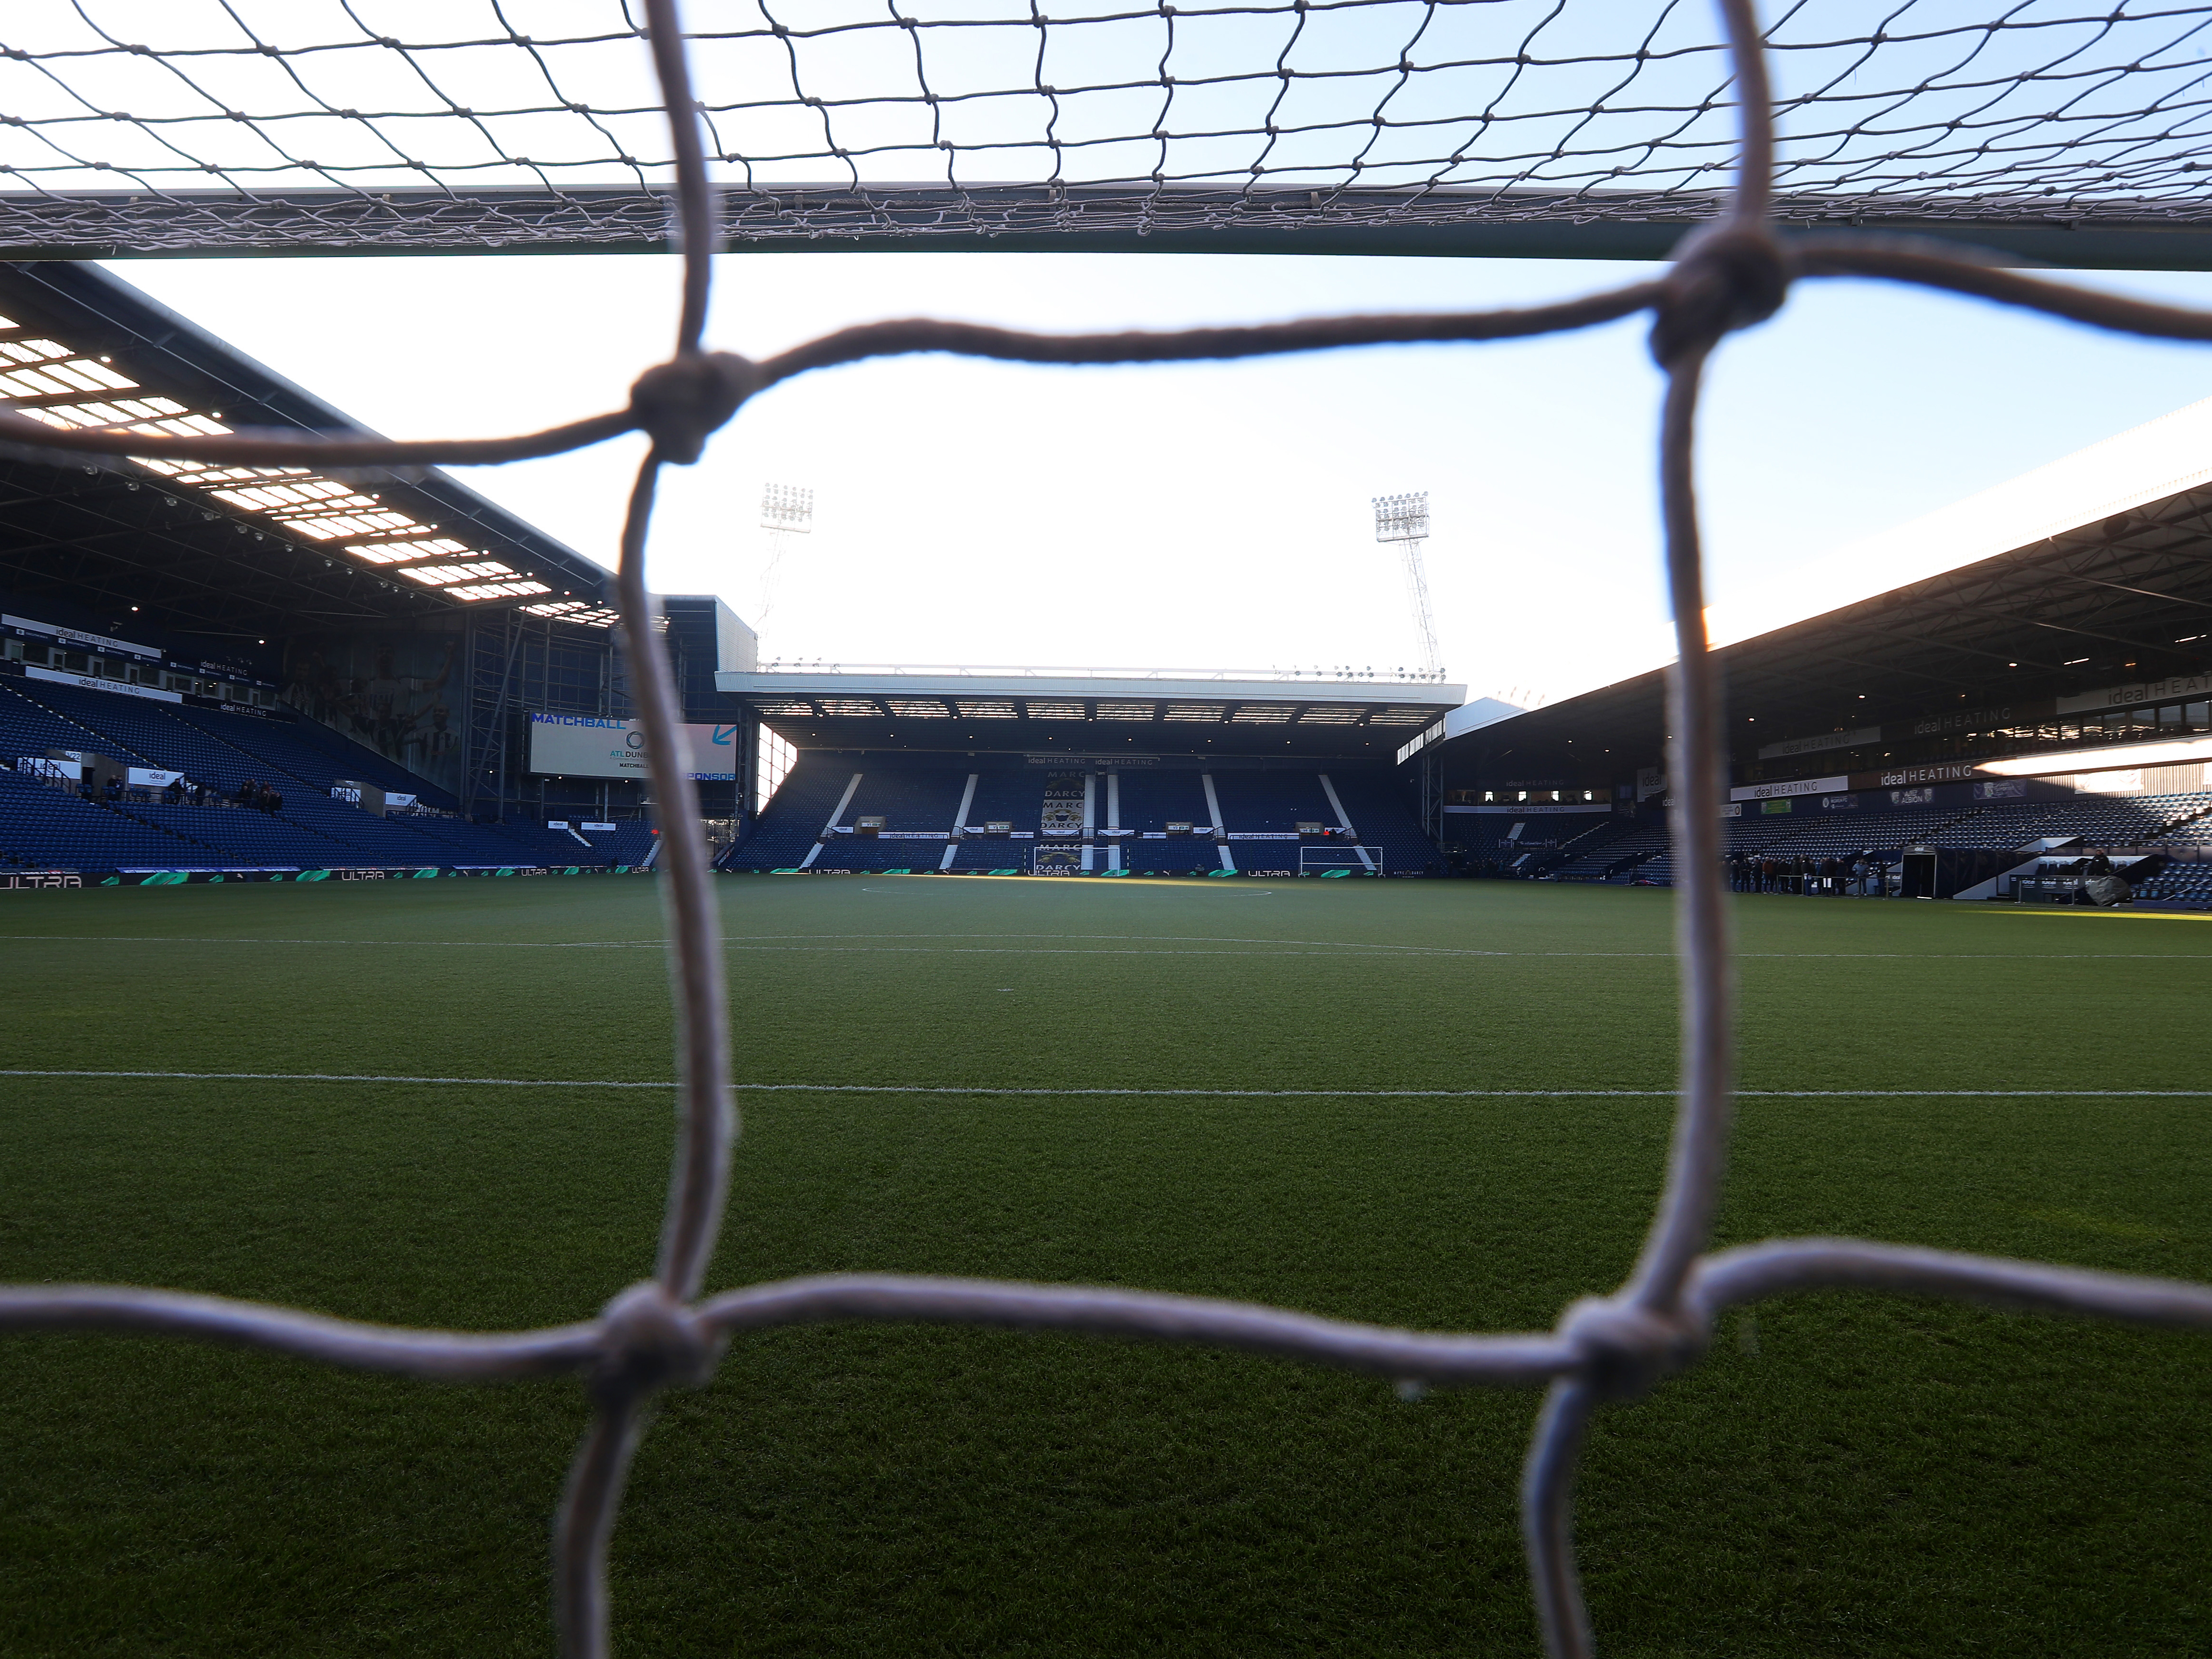 An image of the Smethwick End at The Hawthorns